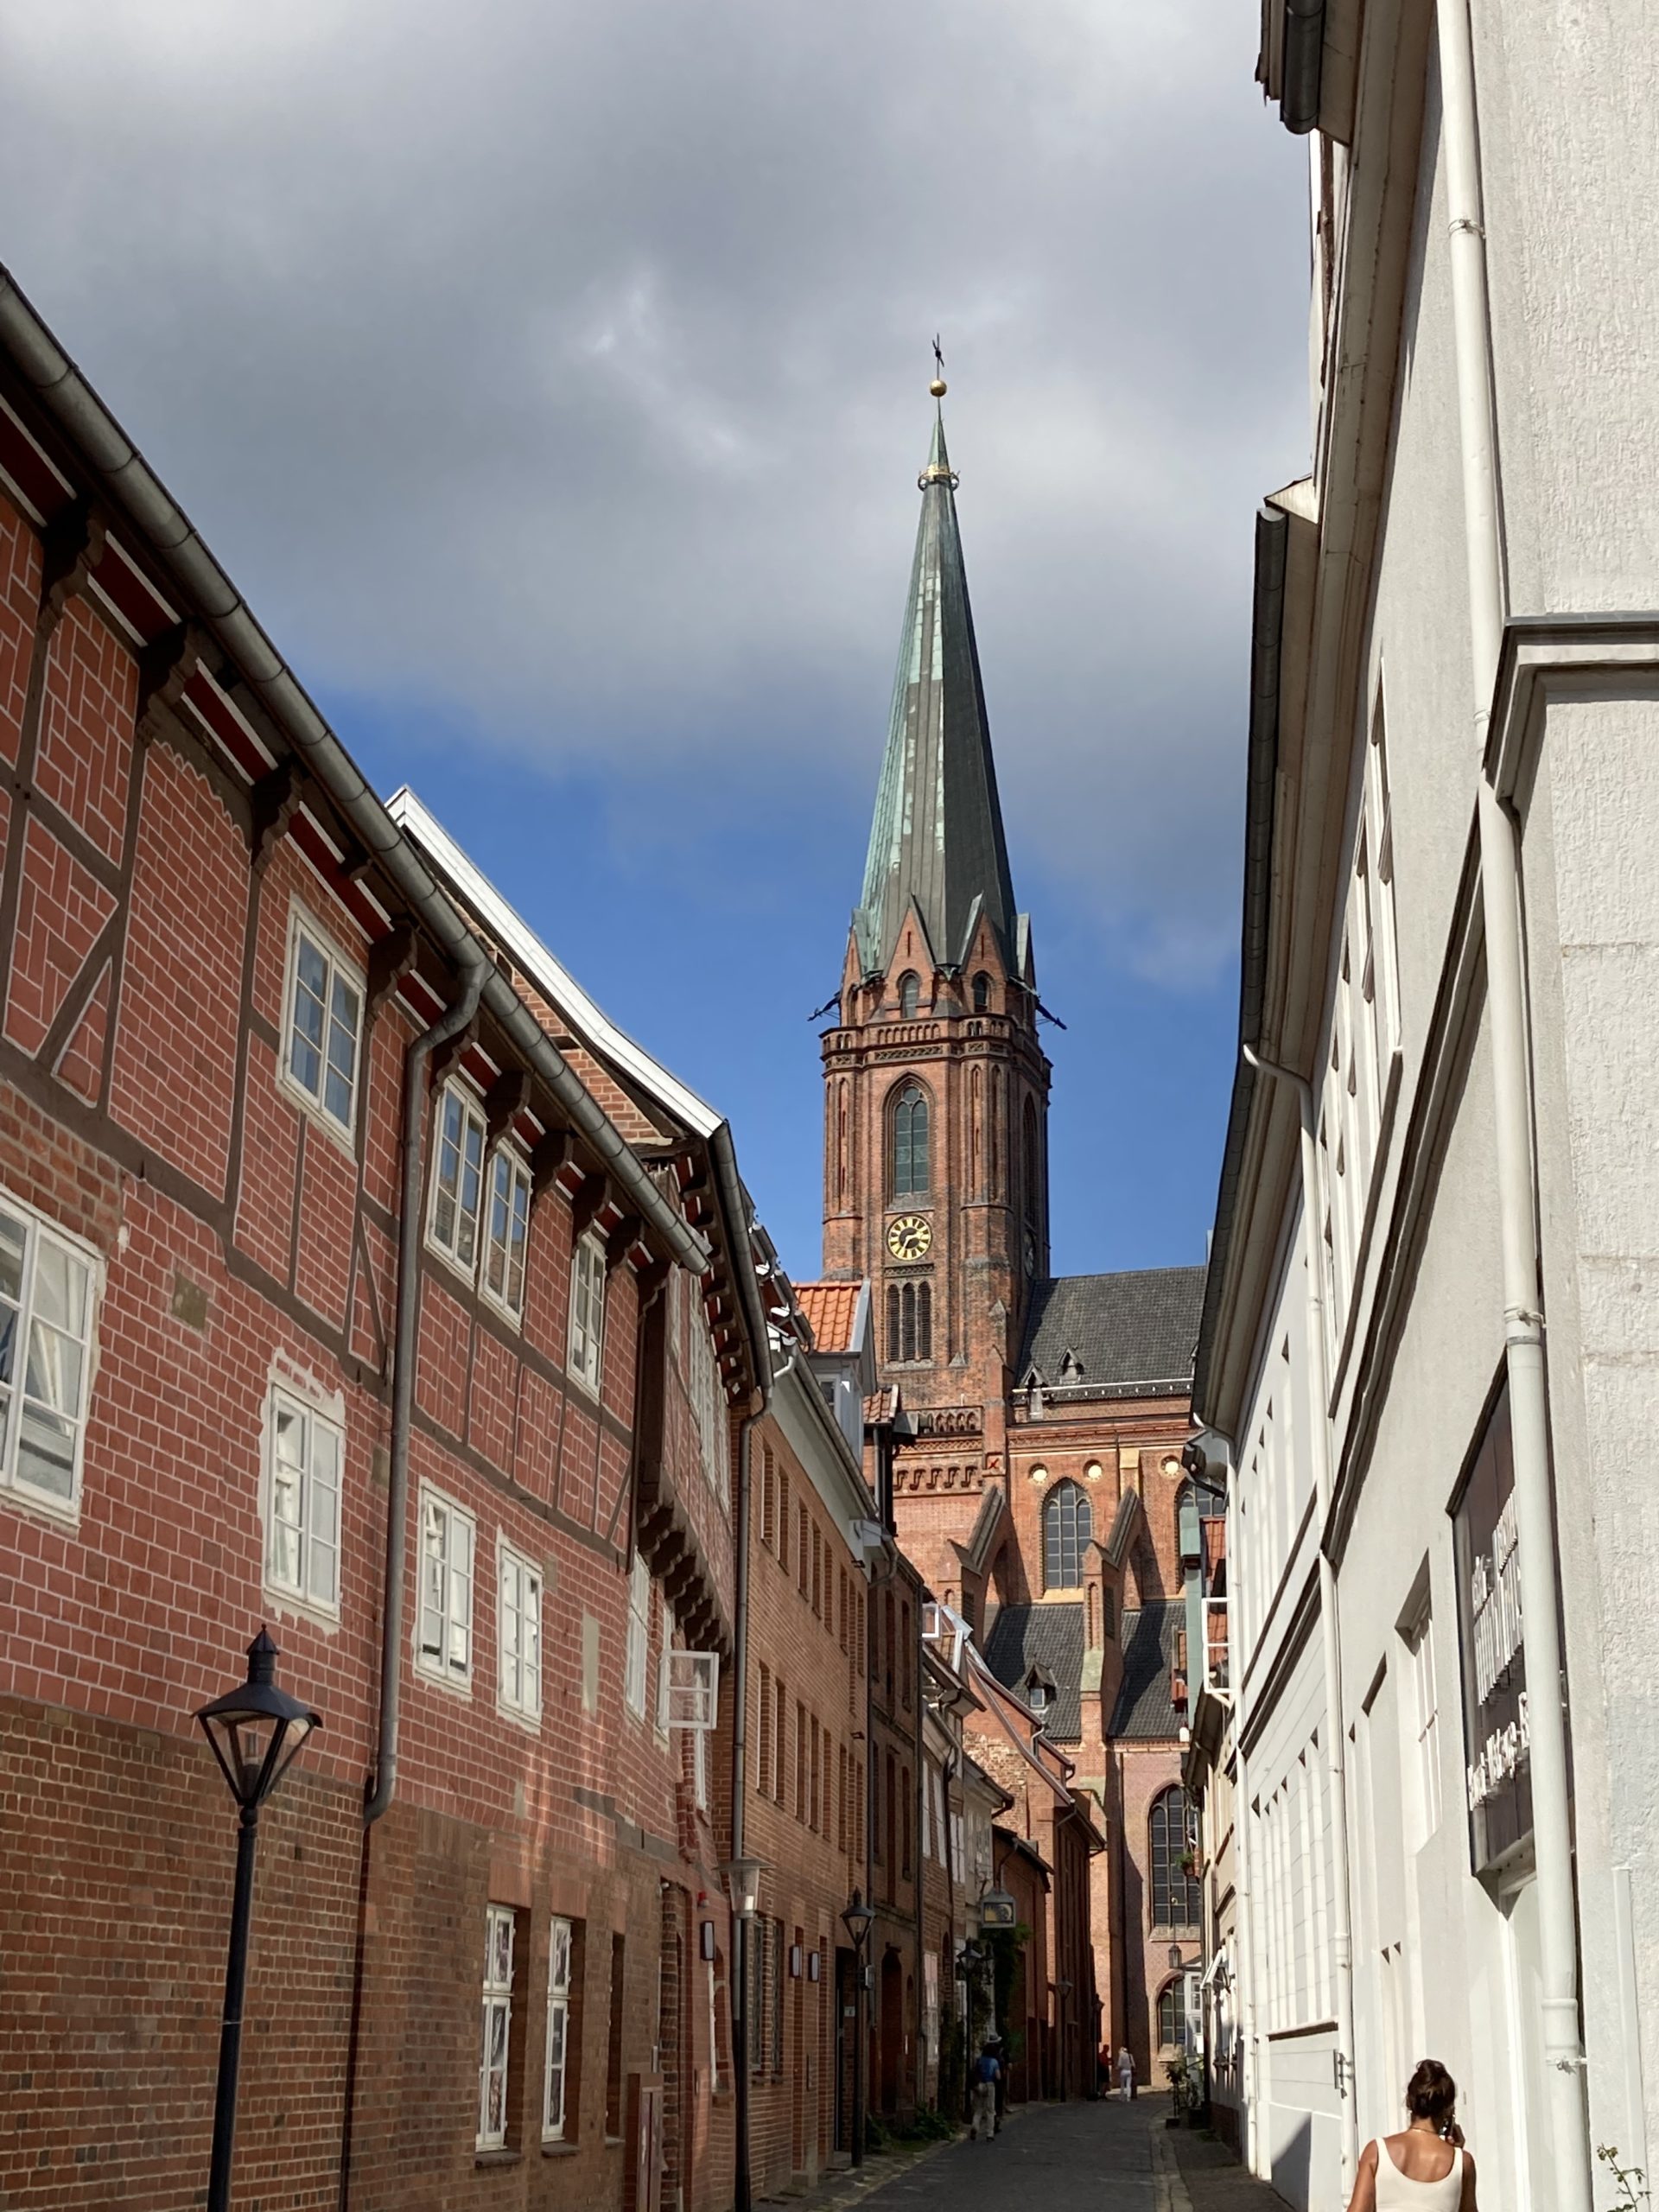 tower of St Nicolai seen from a street with 17th buildings